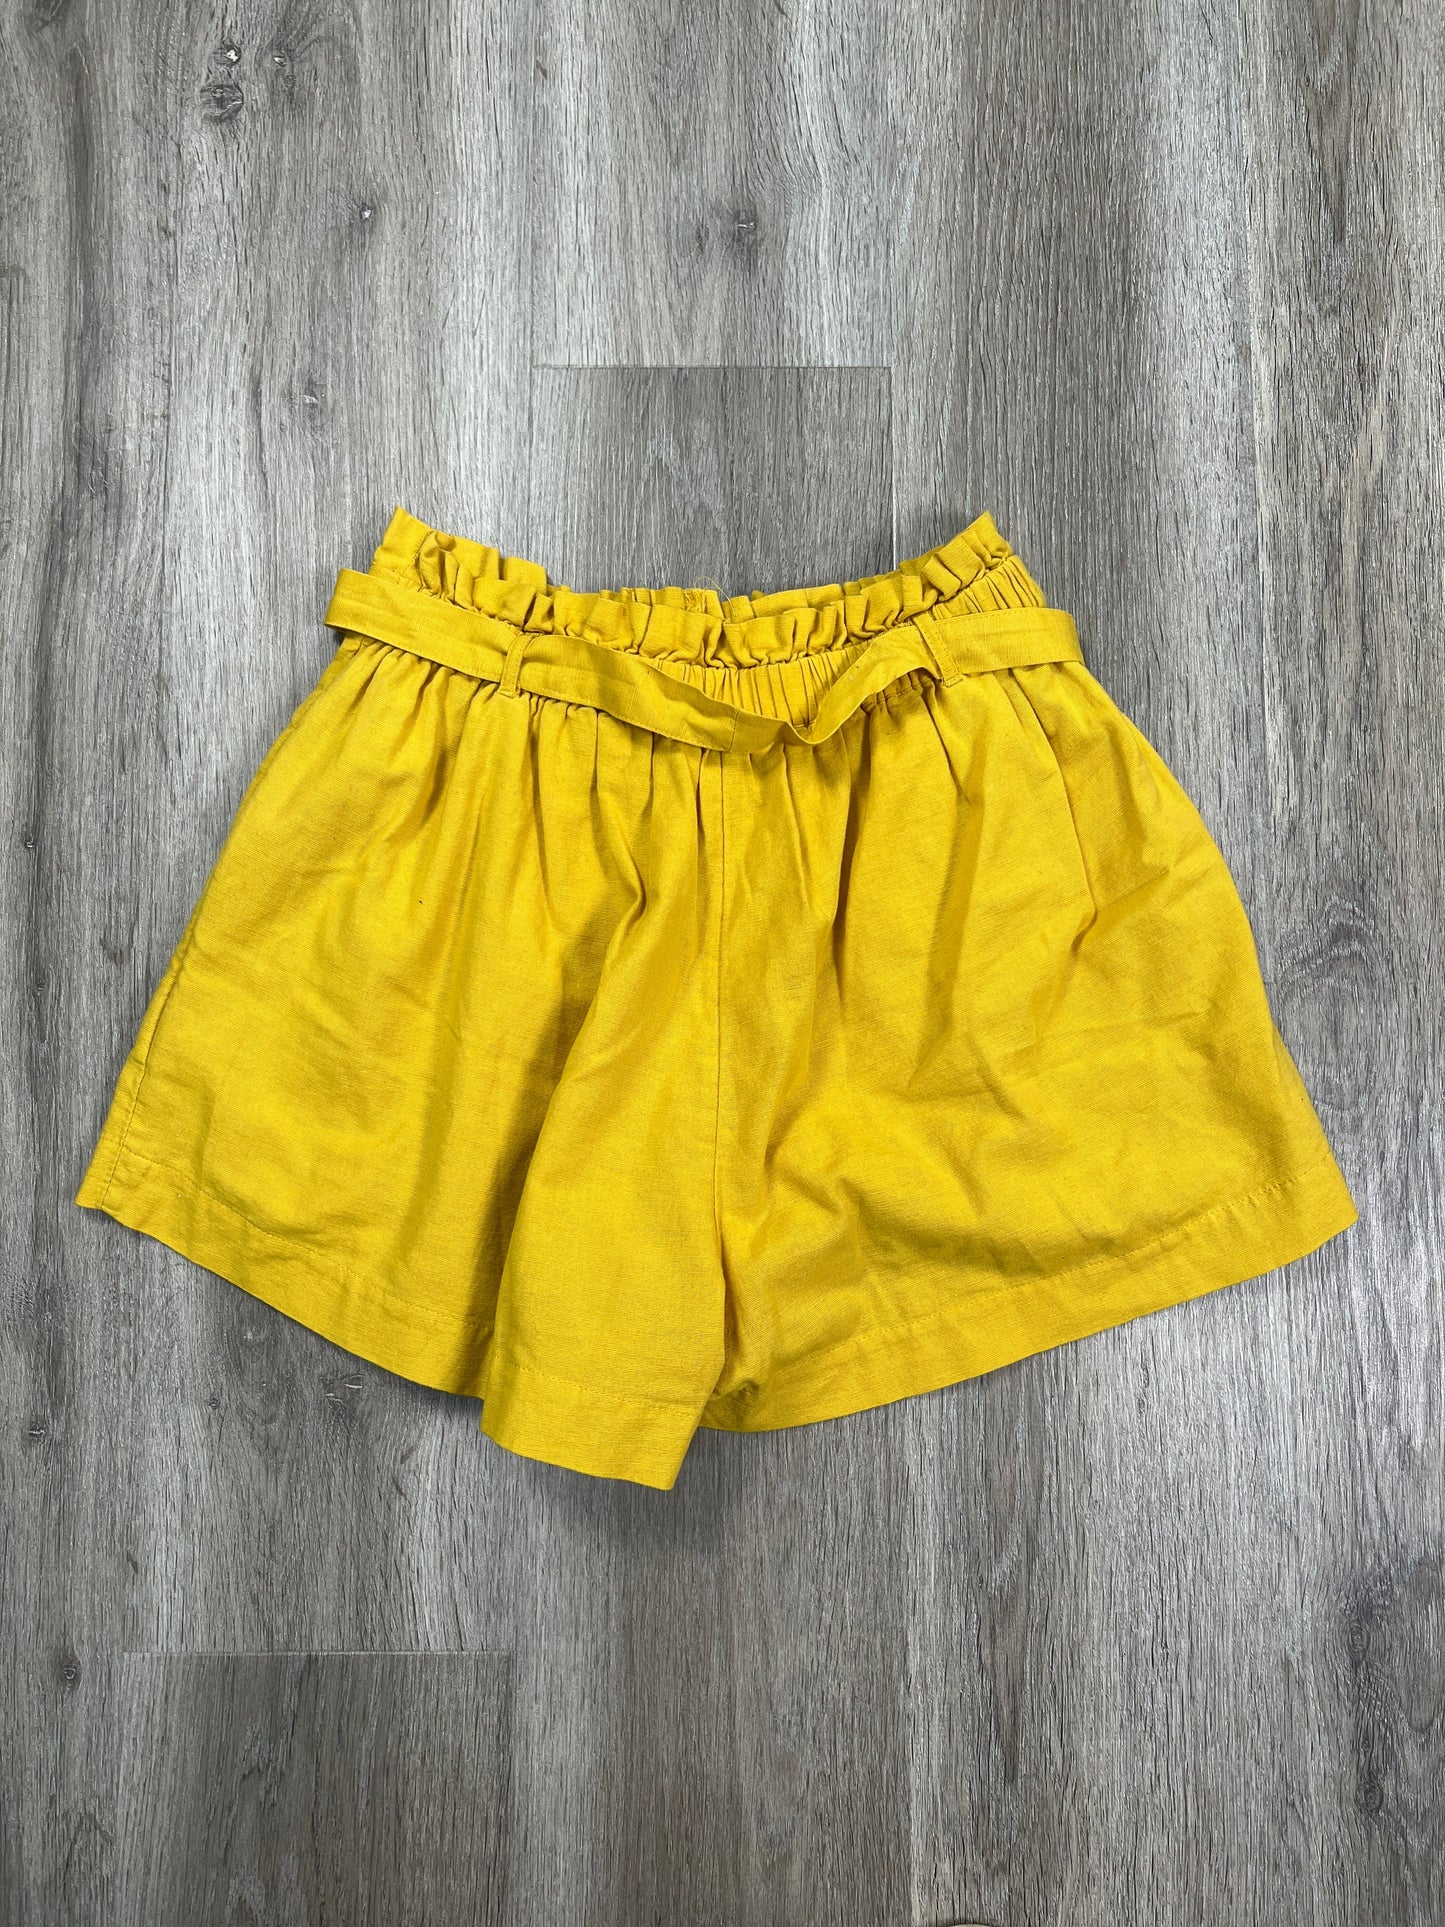 Shorts By American Eagle  Size: M